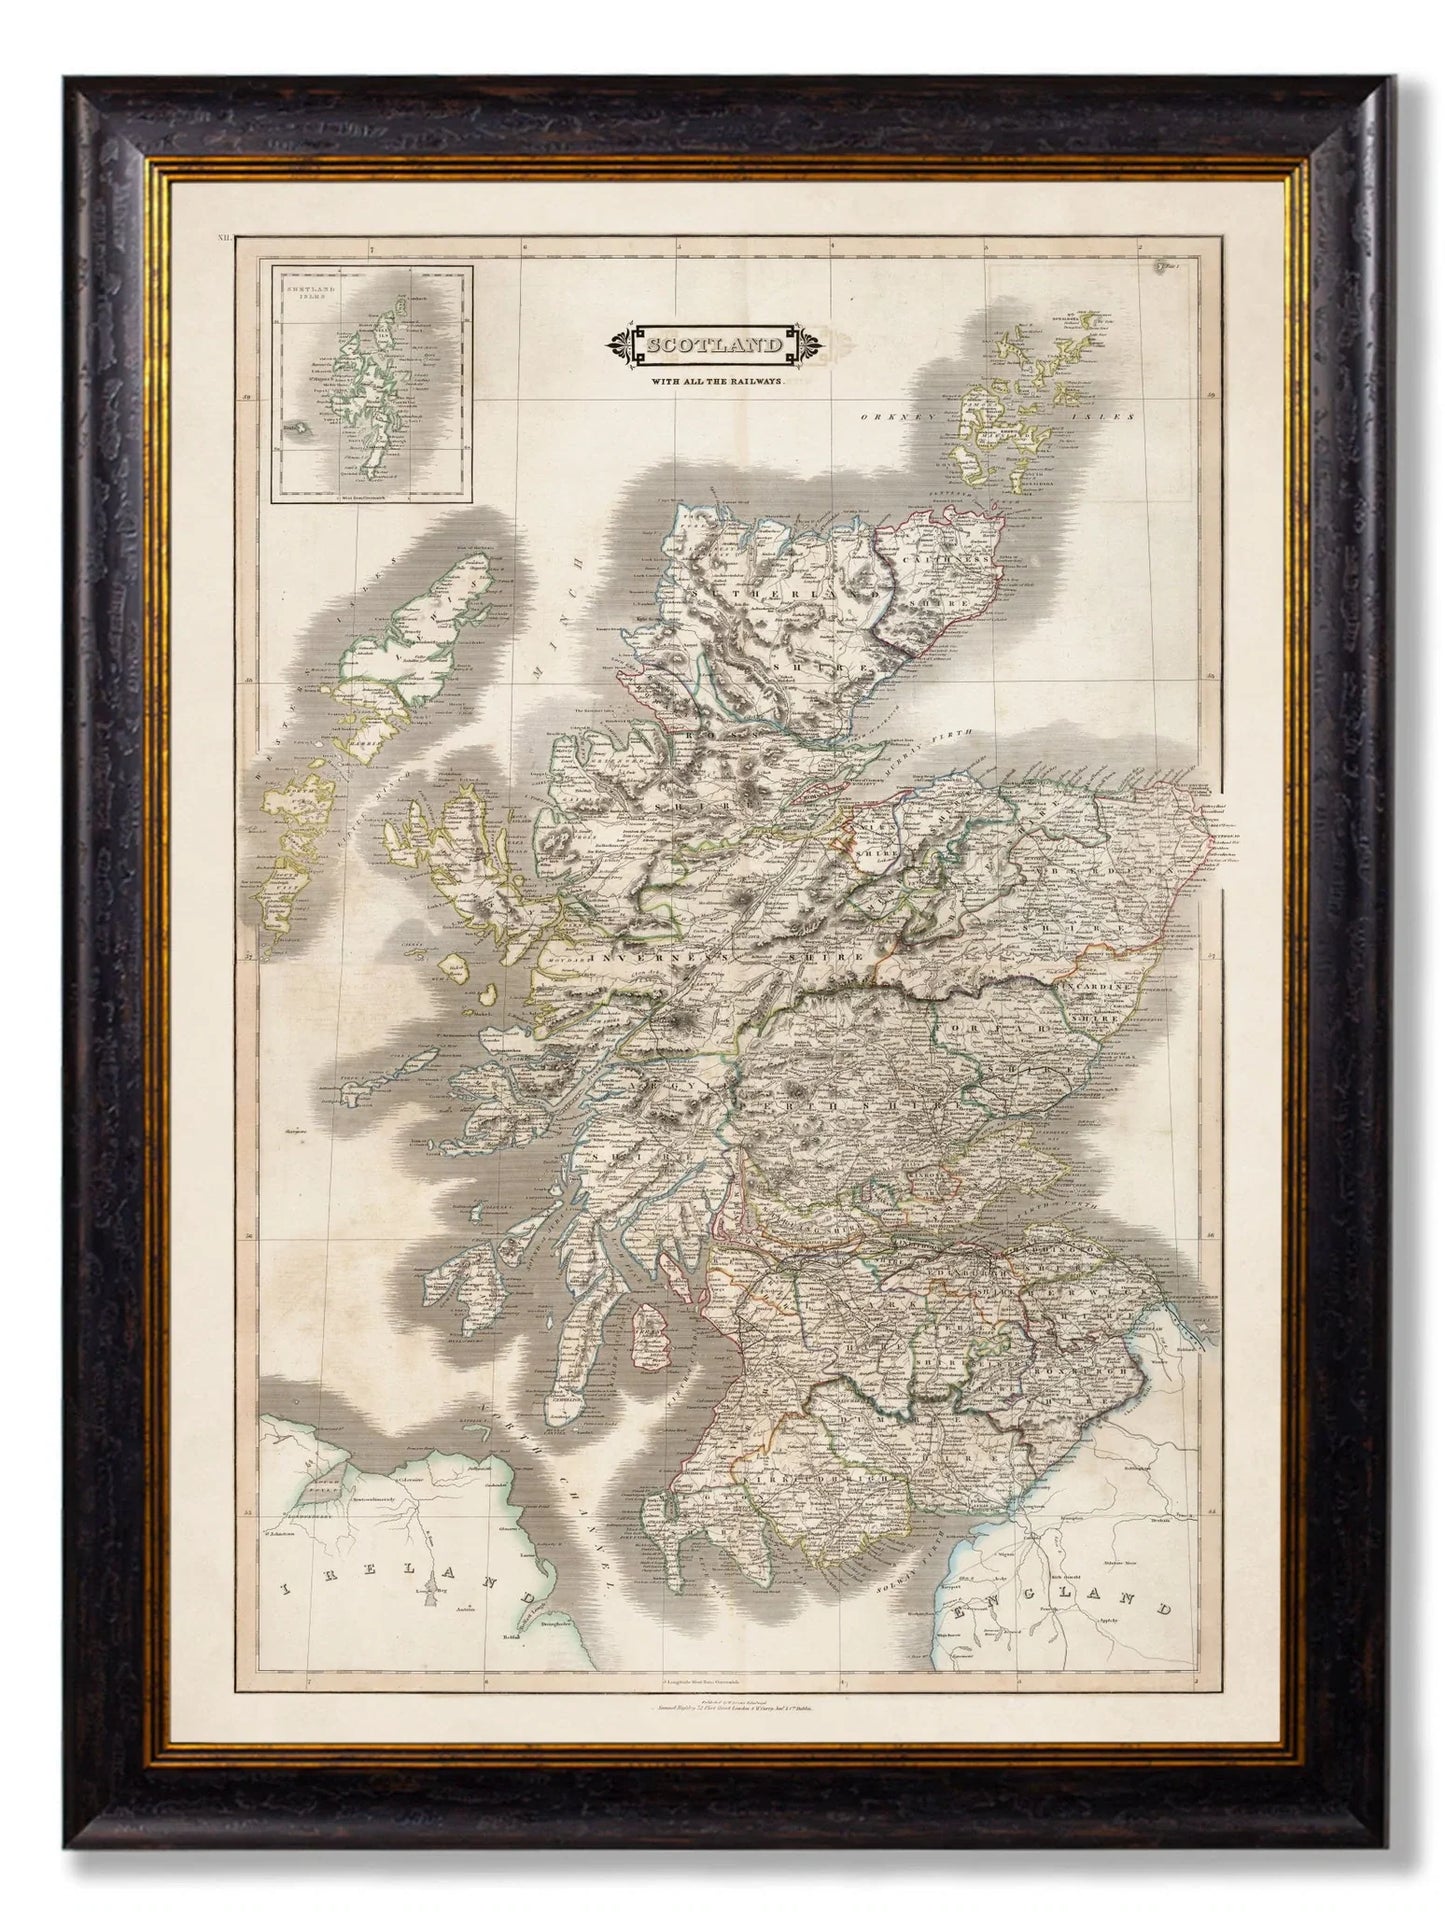 C.1831 Map of Scotland Frame for sale - Woodcock and Cavendish